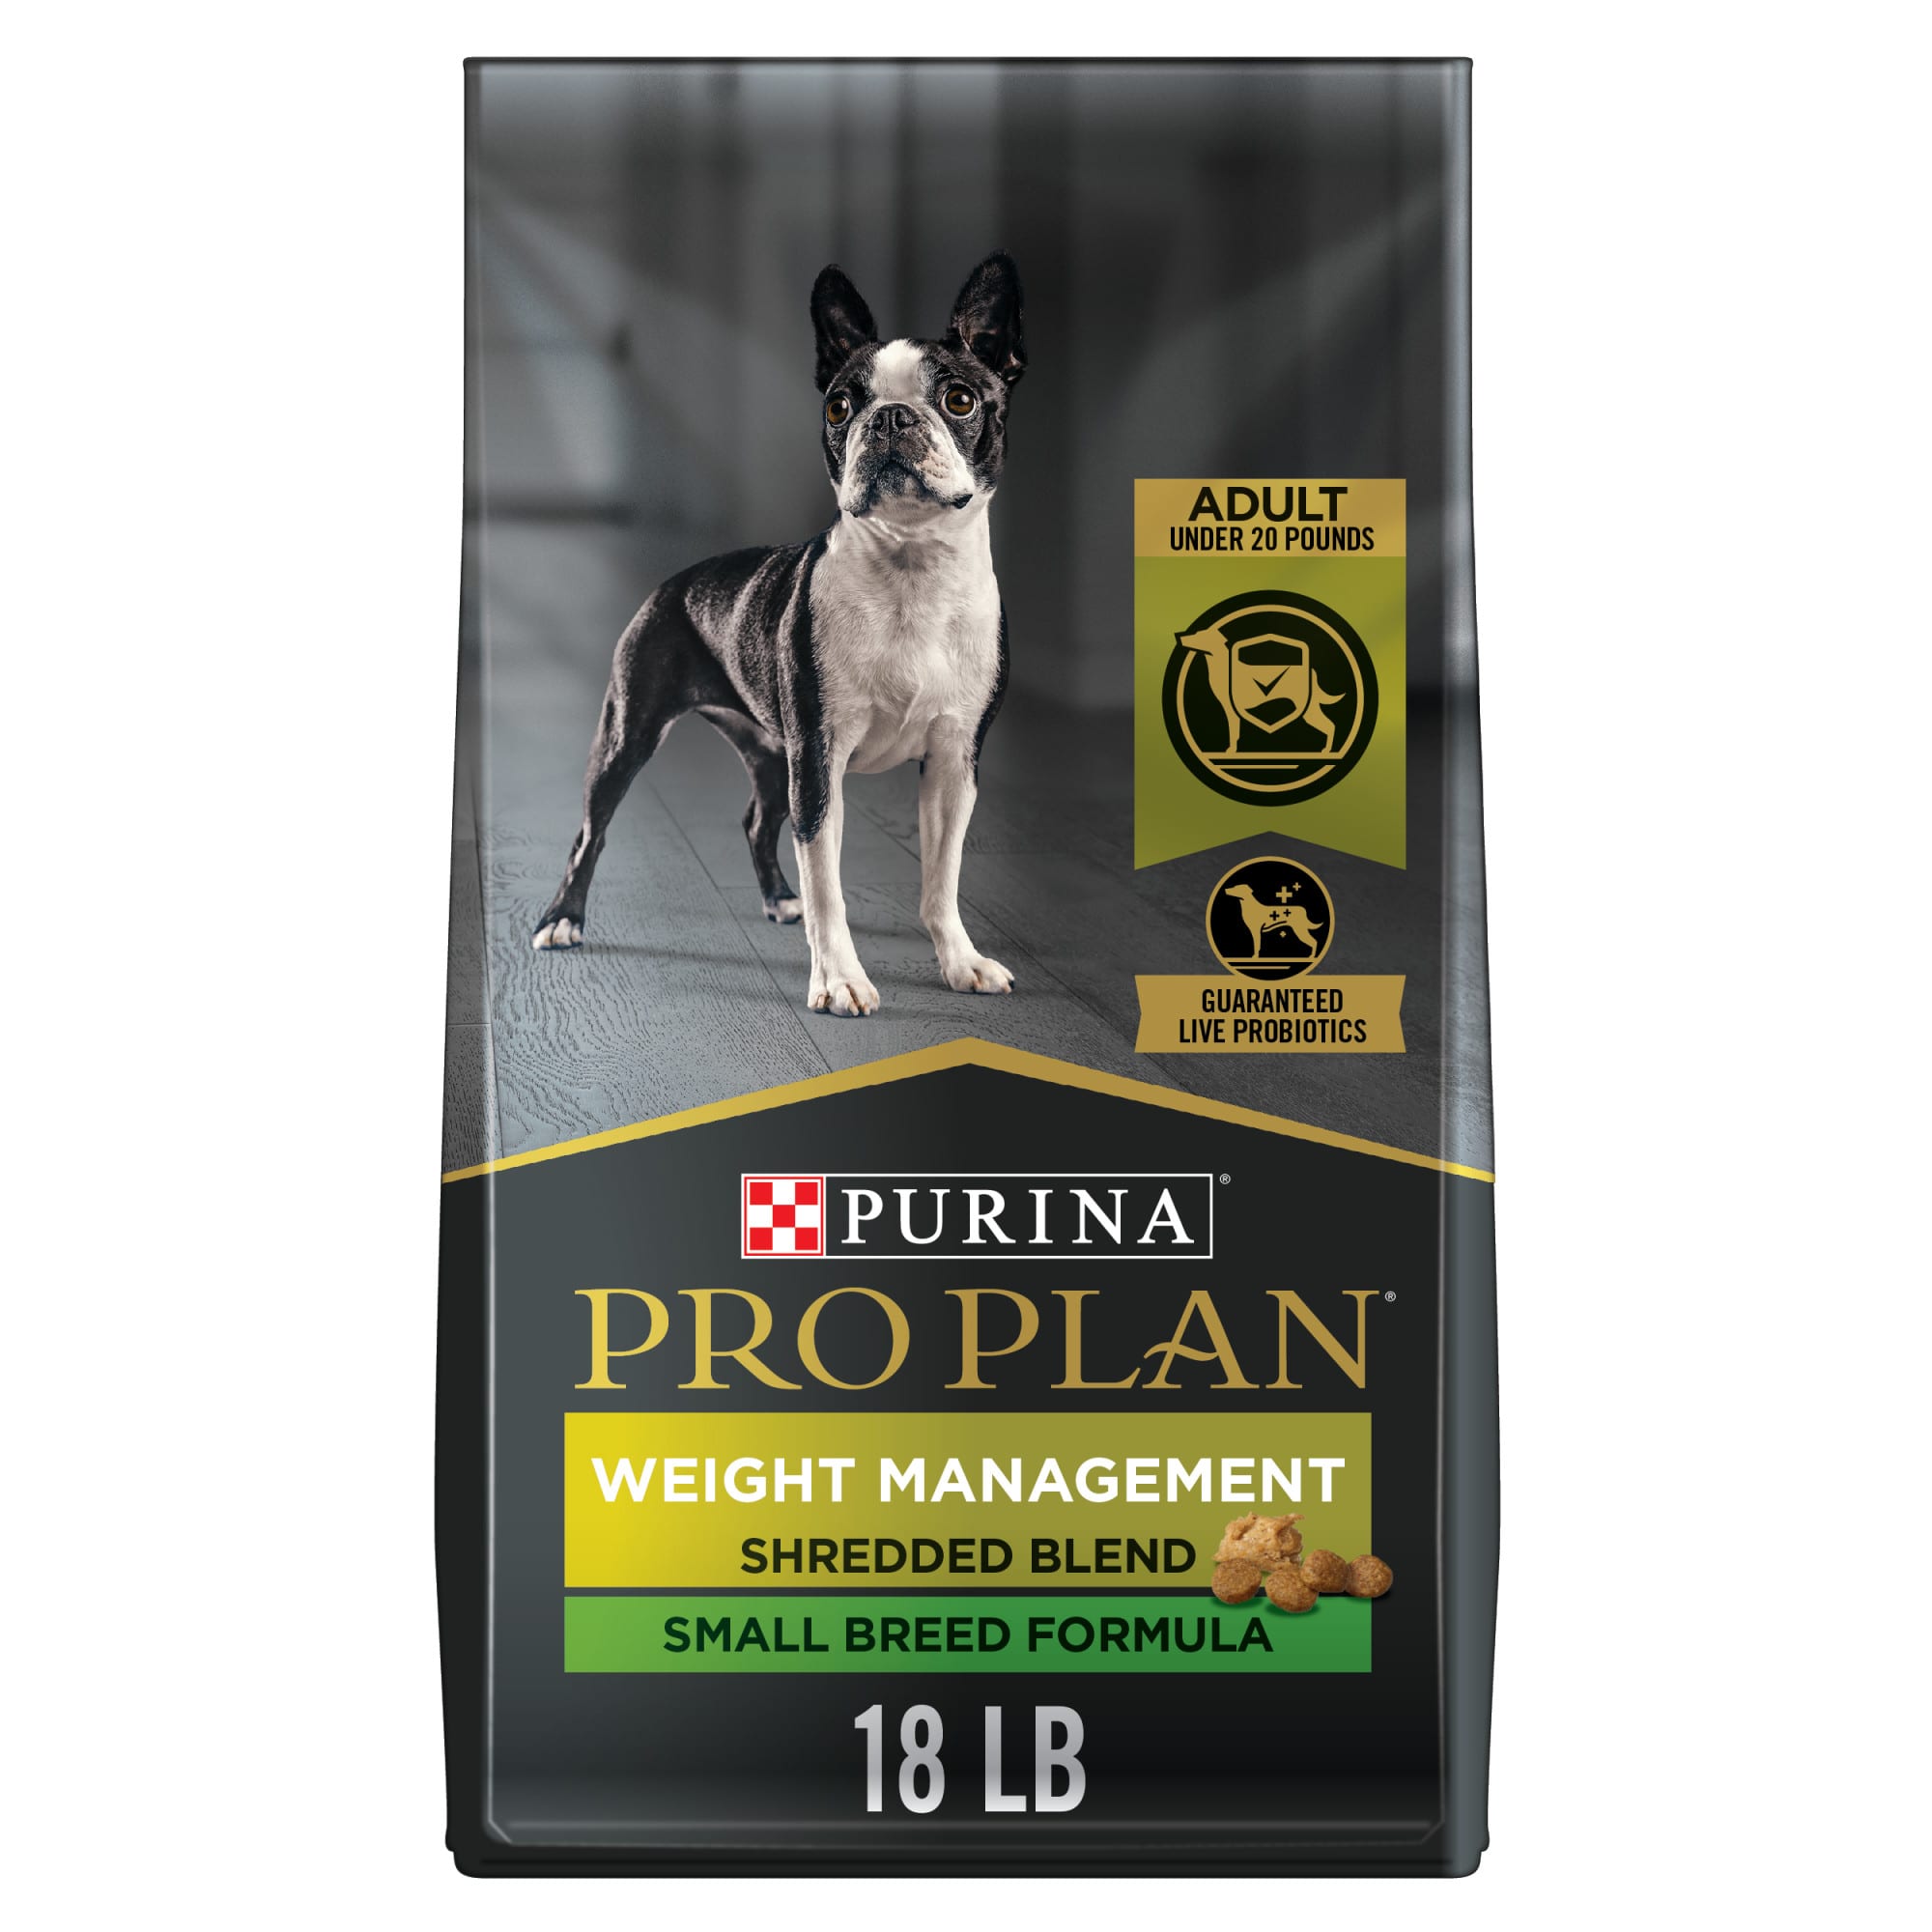 Purina Pro Plan Shredded Blend Chicken & Rice Formula Small Breed Weight Management Dry Dog Food, 18 lbs.